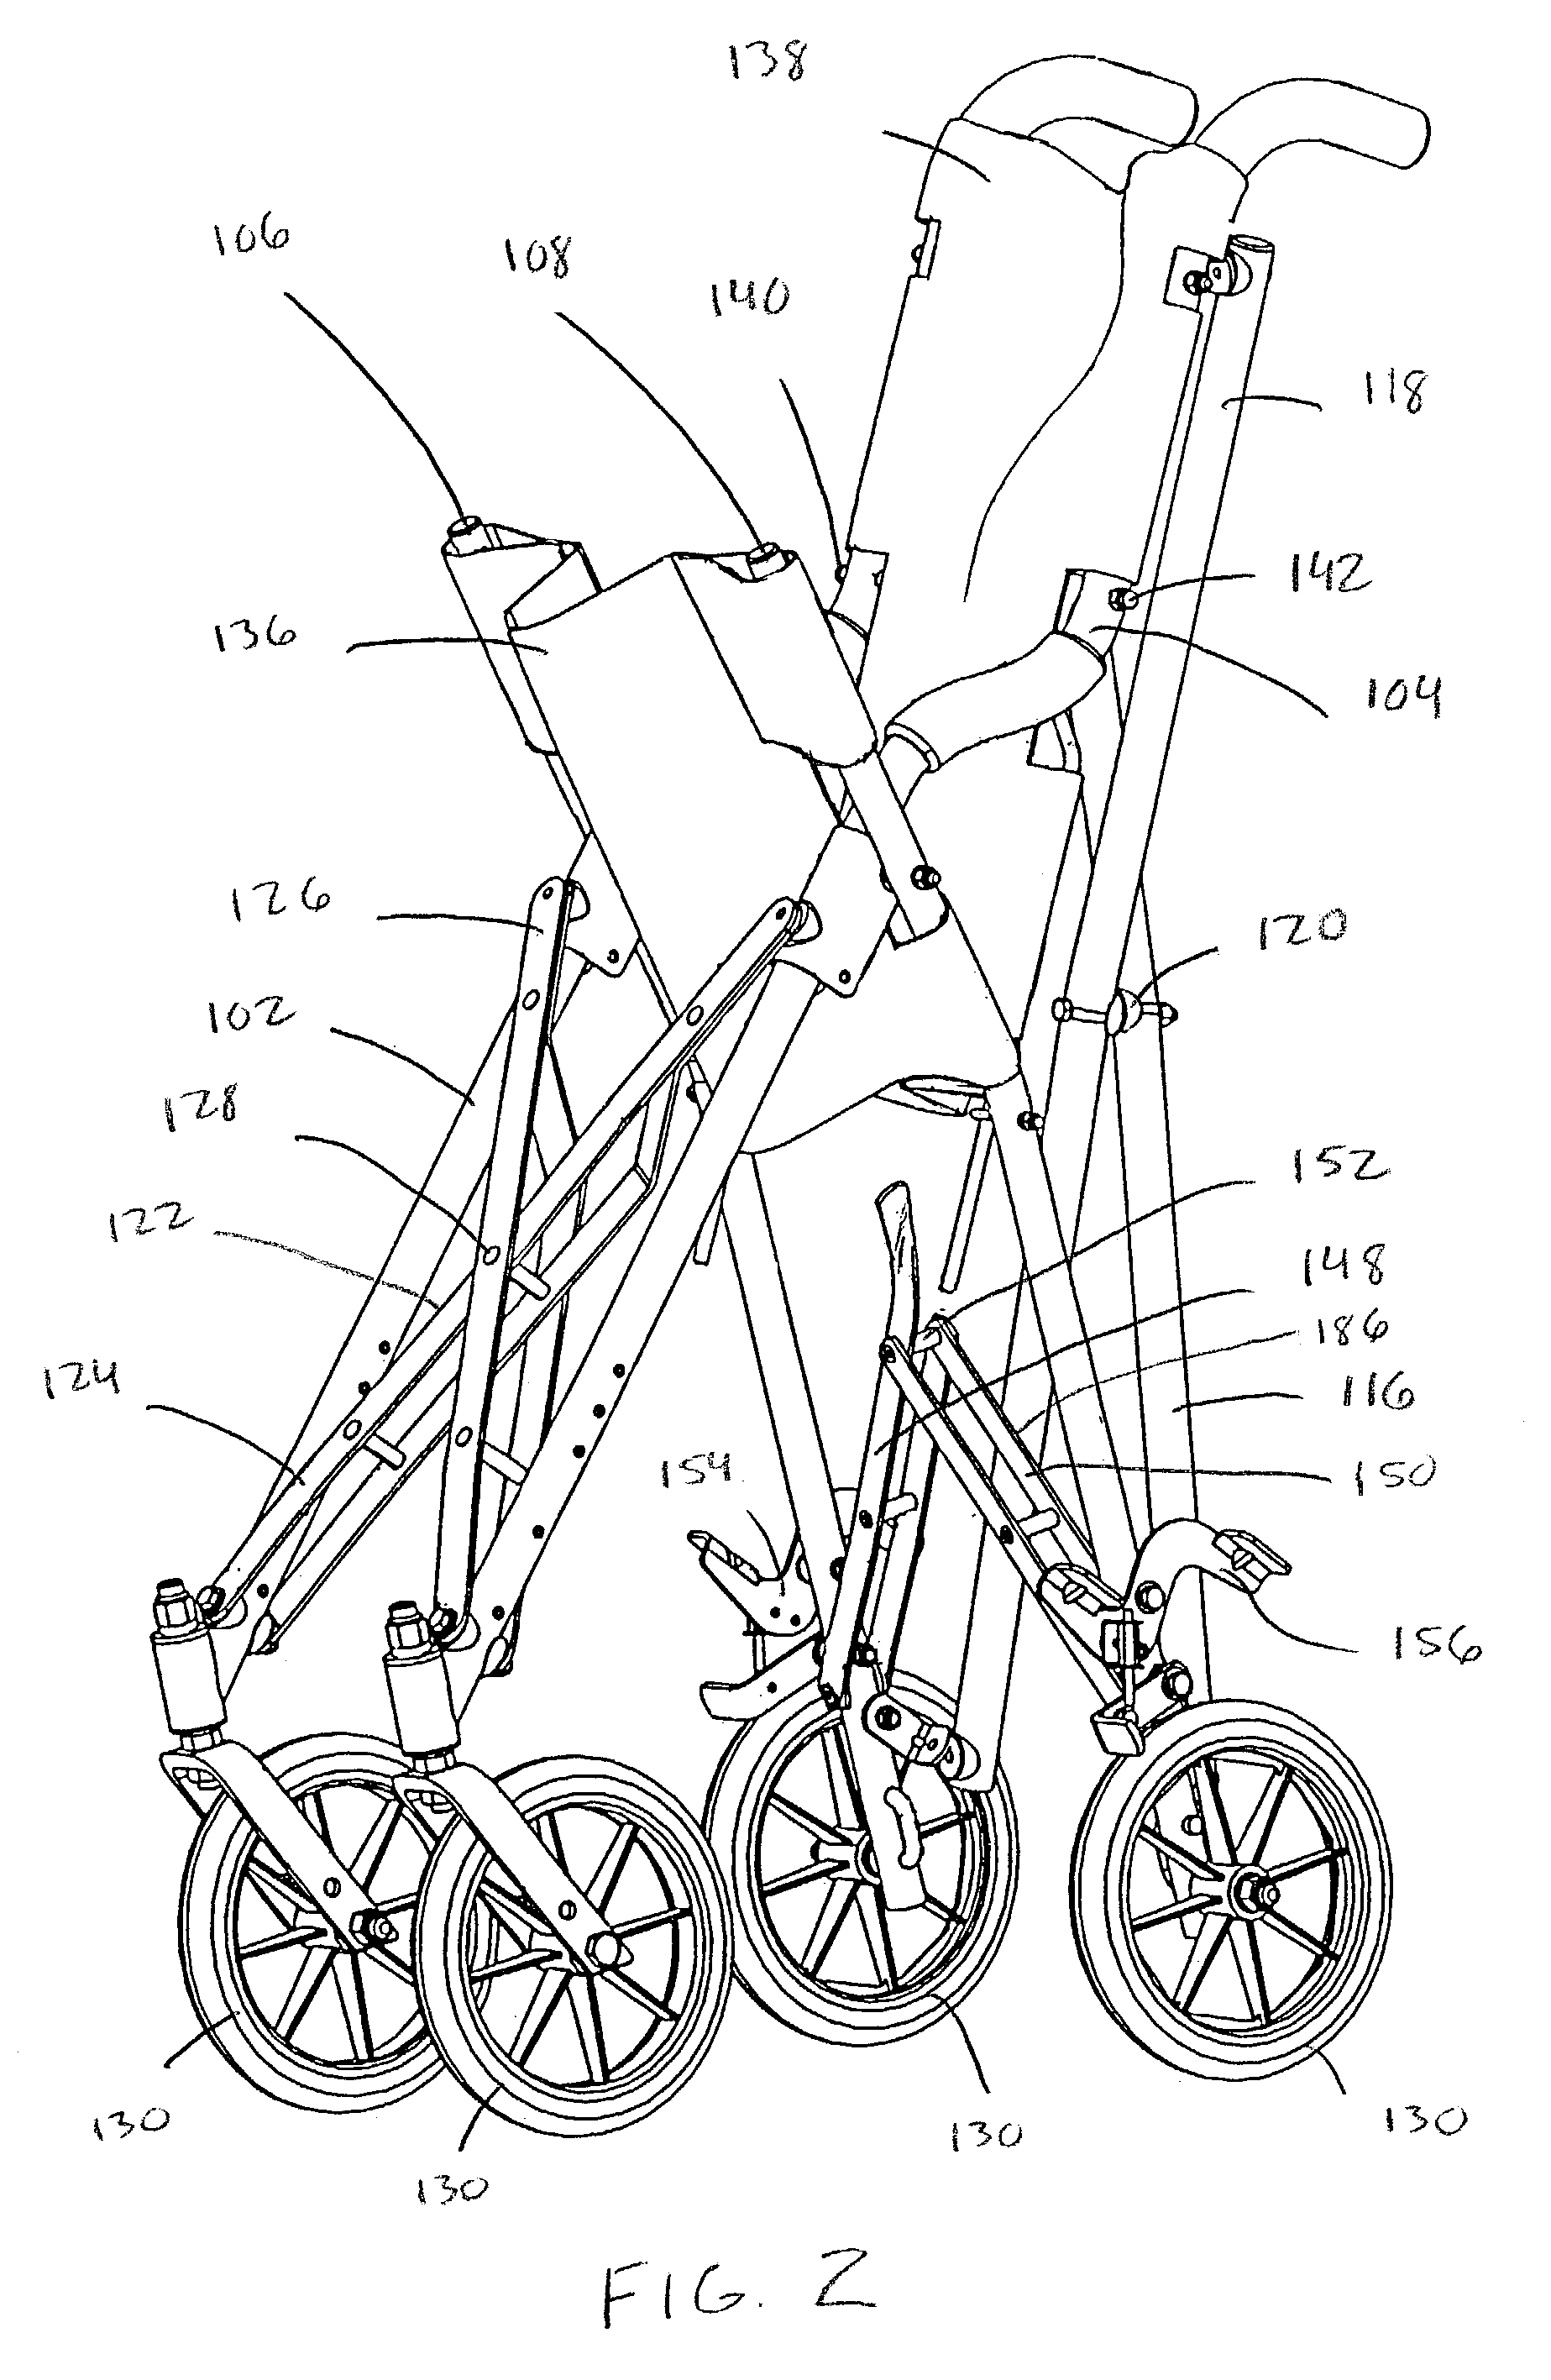 Folding seat support structure